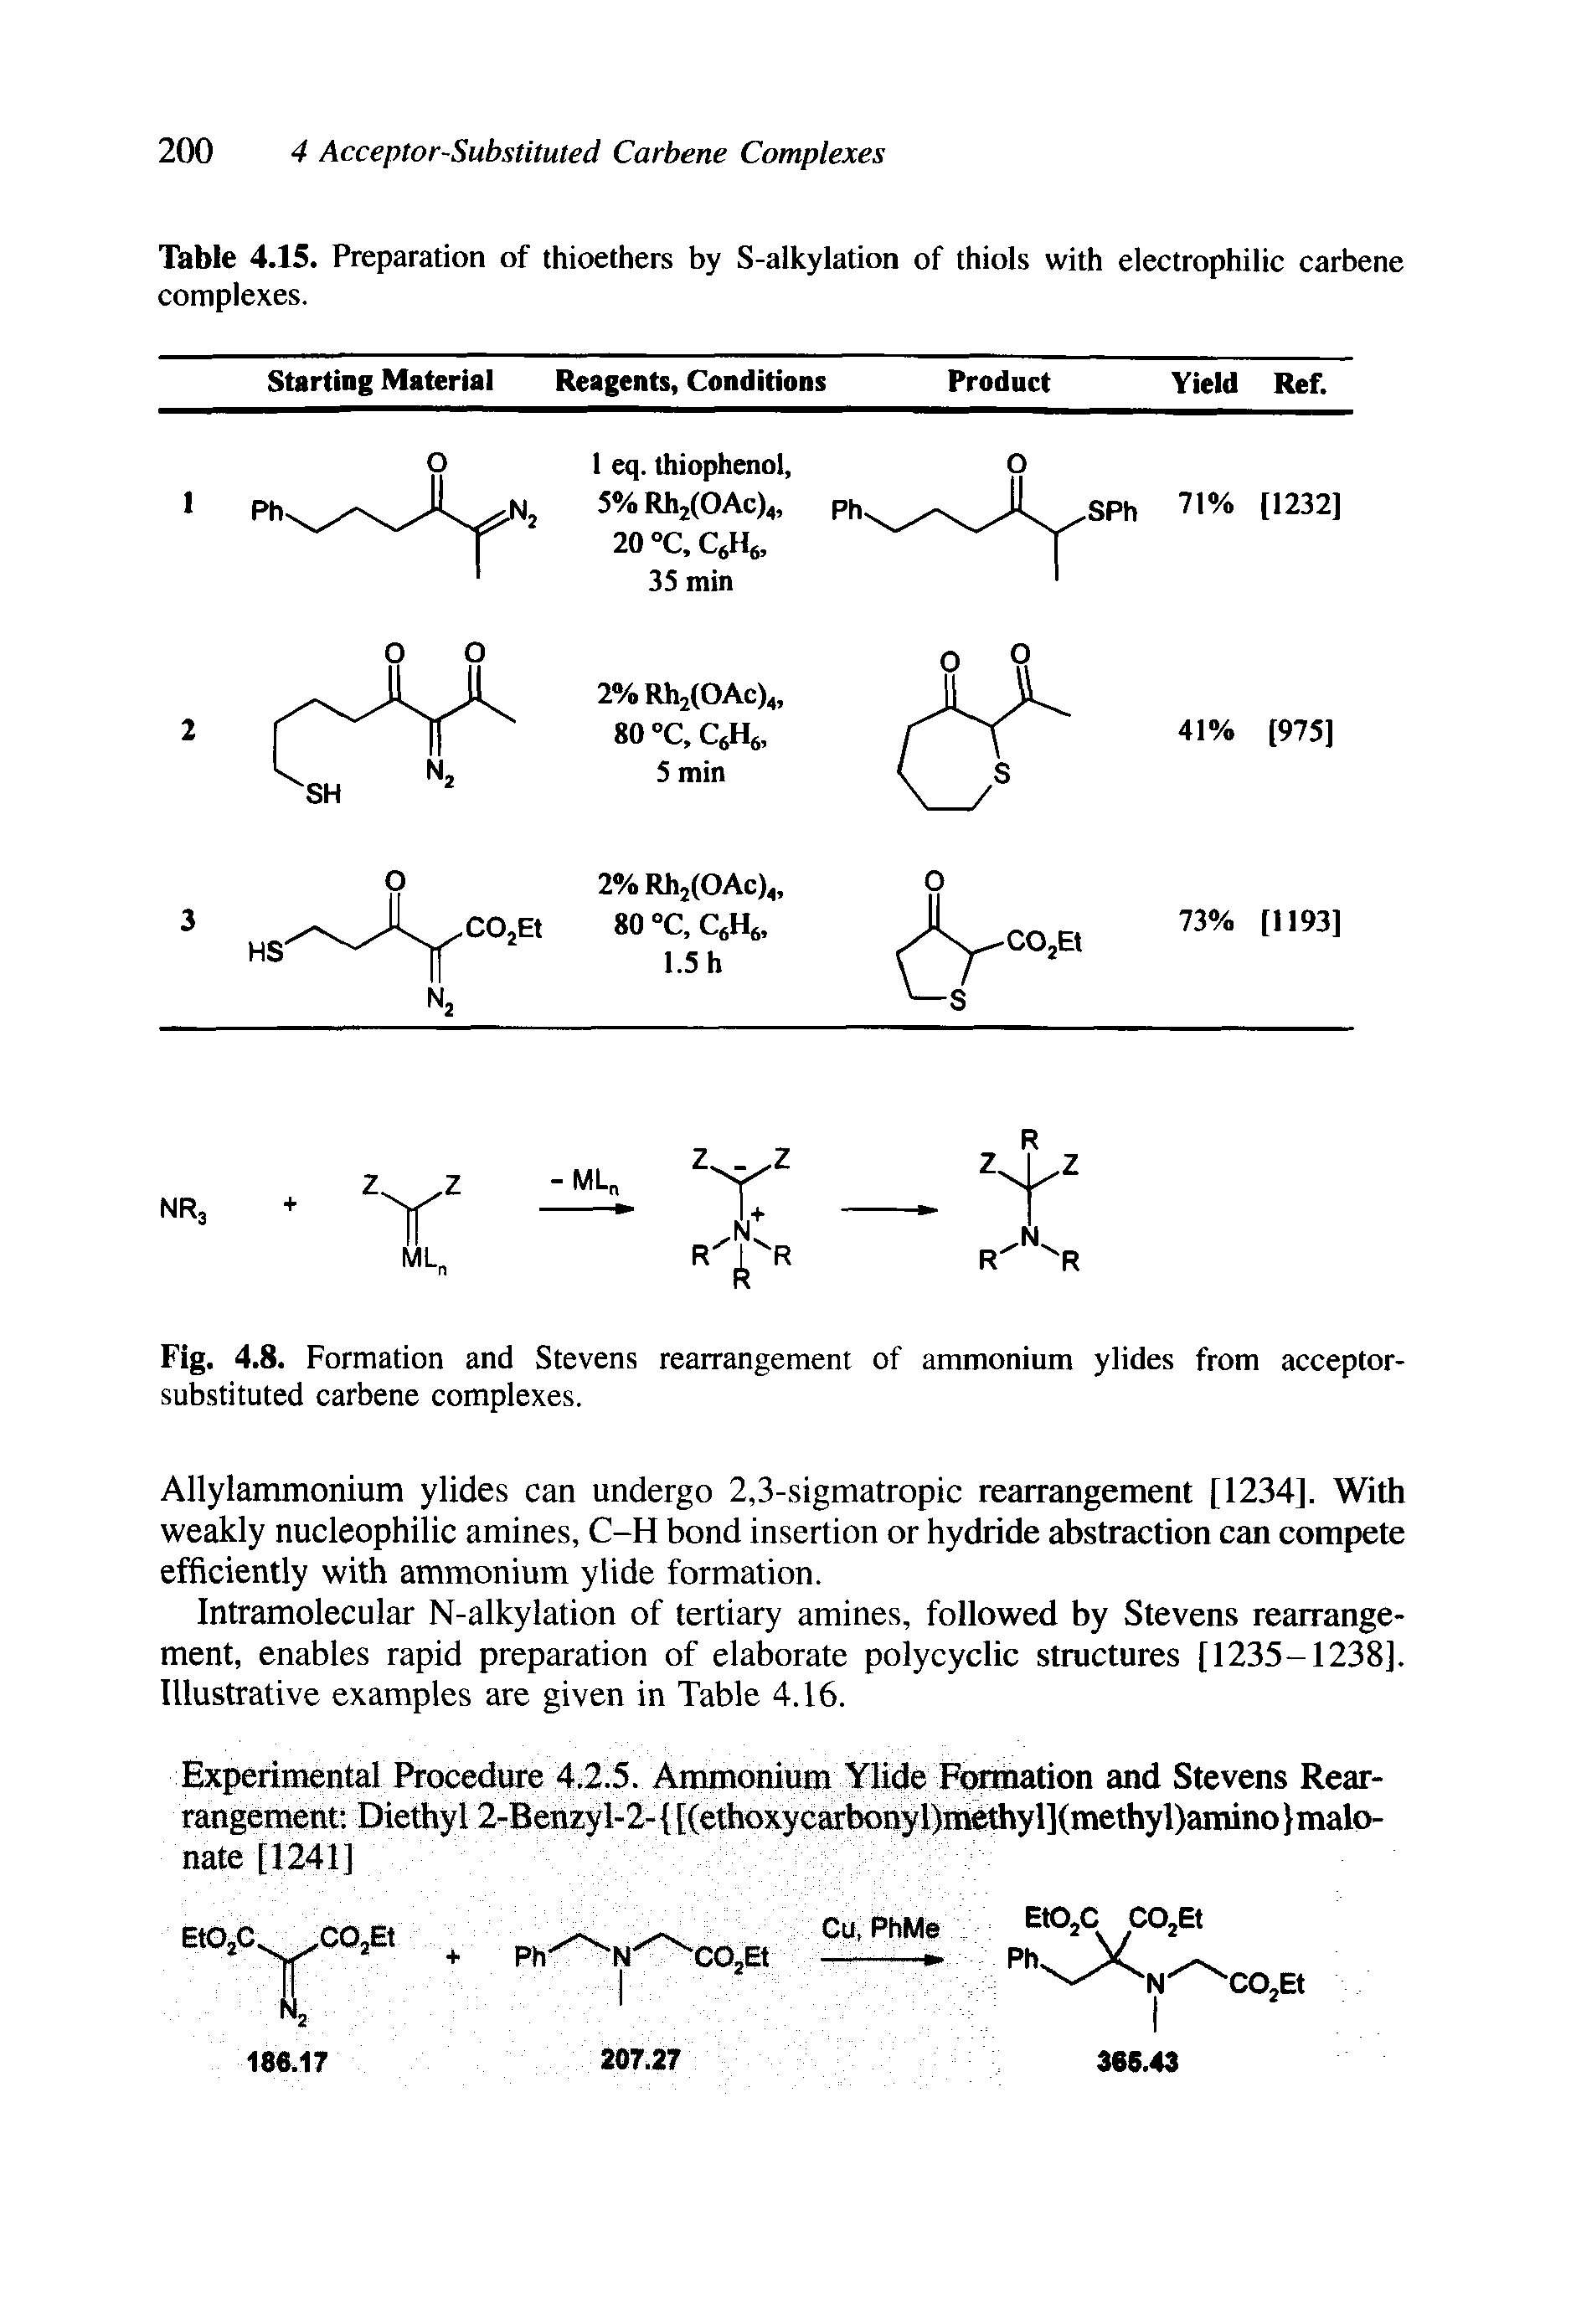 Table 4.15. Preparation of thioethers by S-alkylation of thiols with electrophilic carbene complexes.